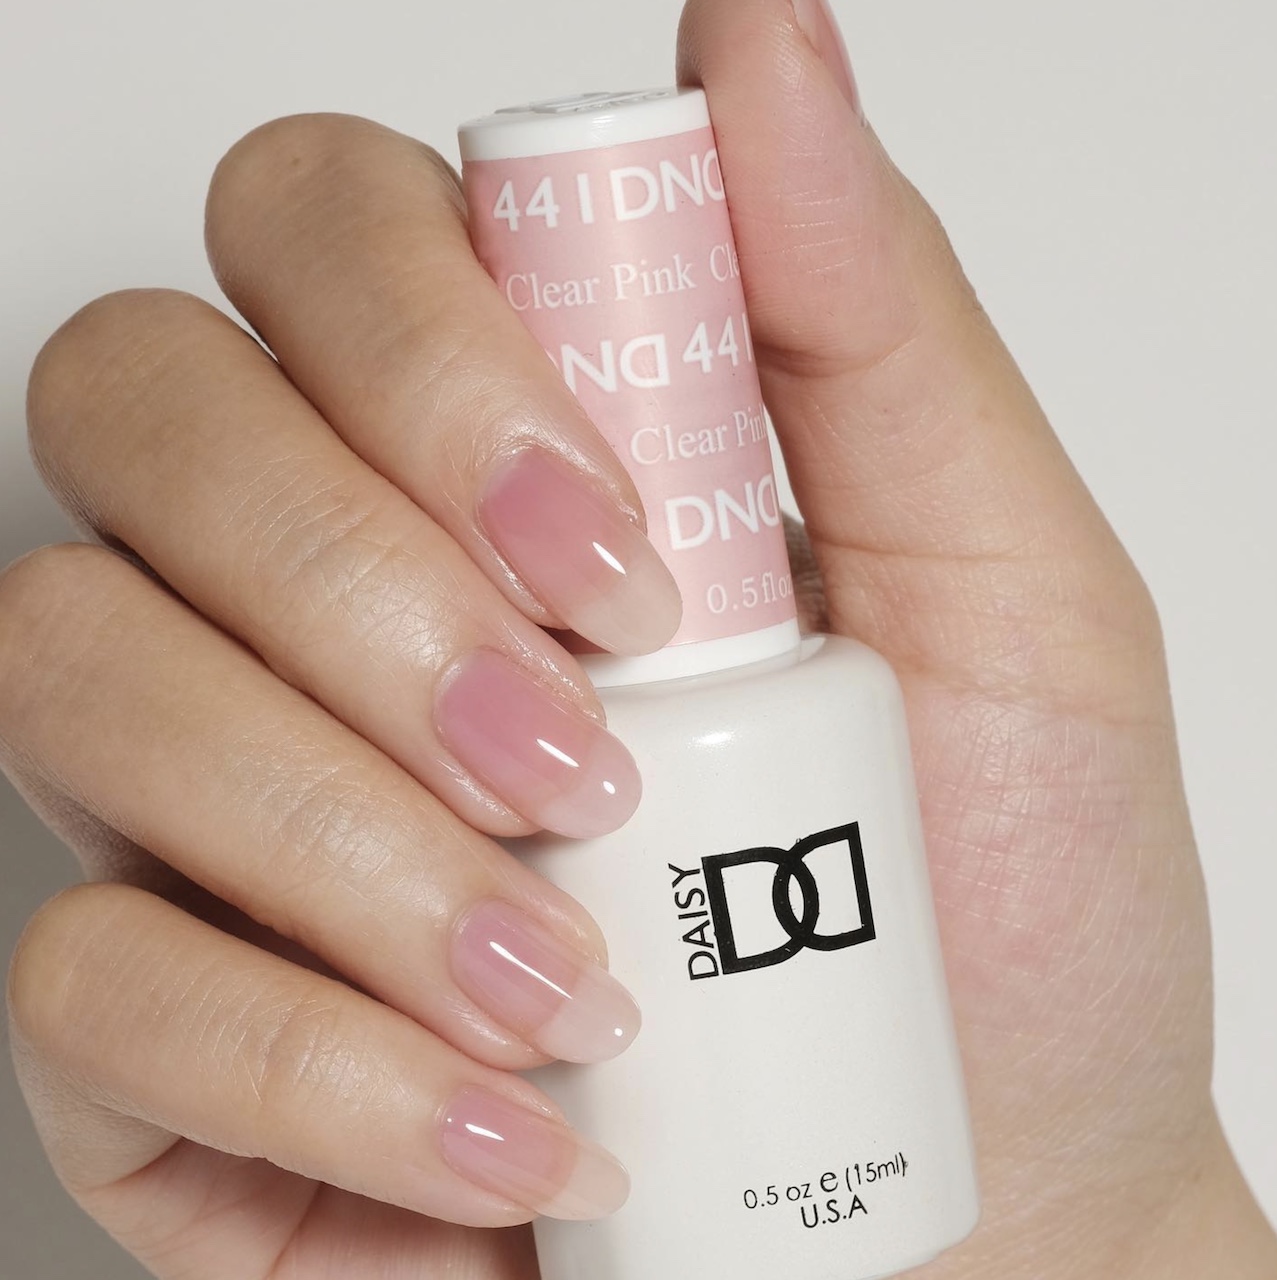 DND Duo - DND441 - Clear Pink